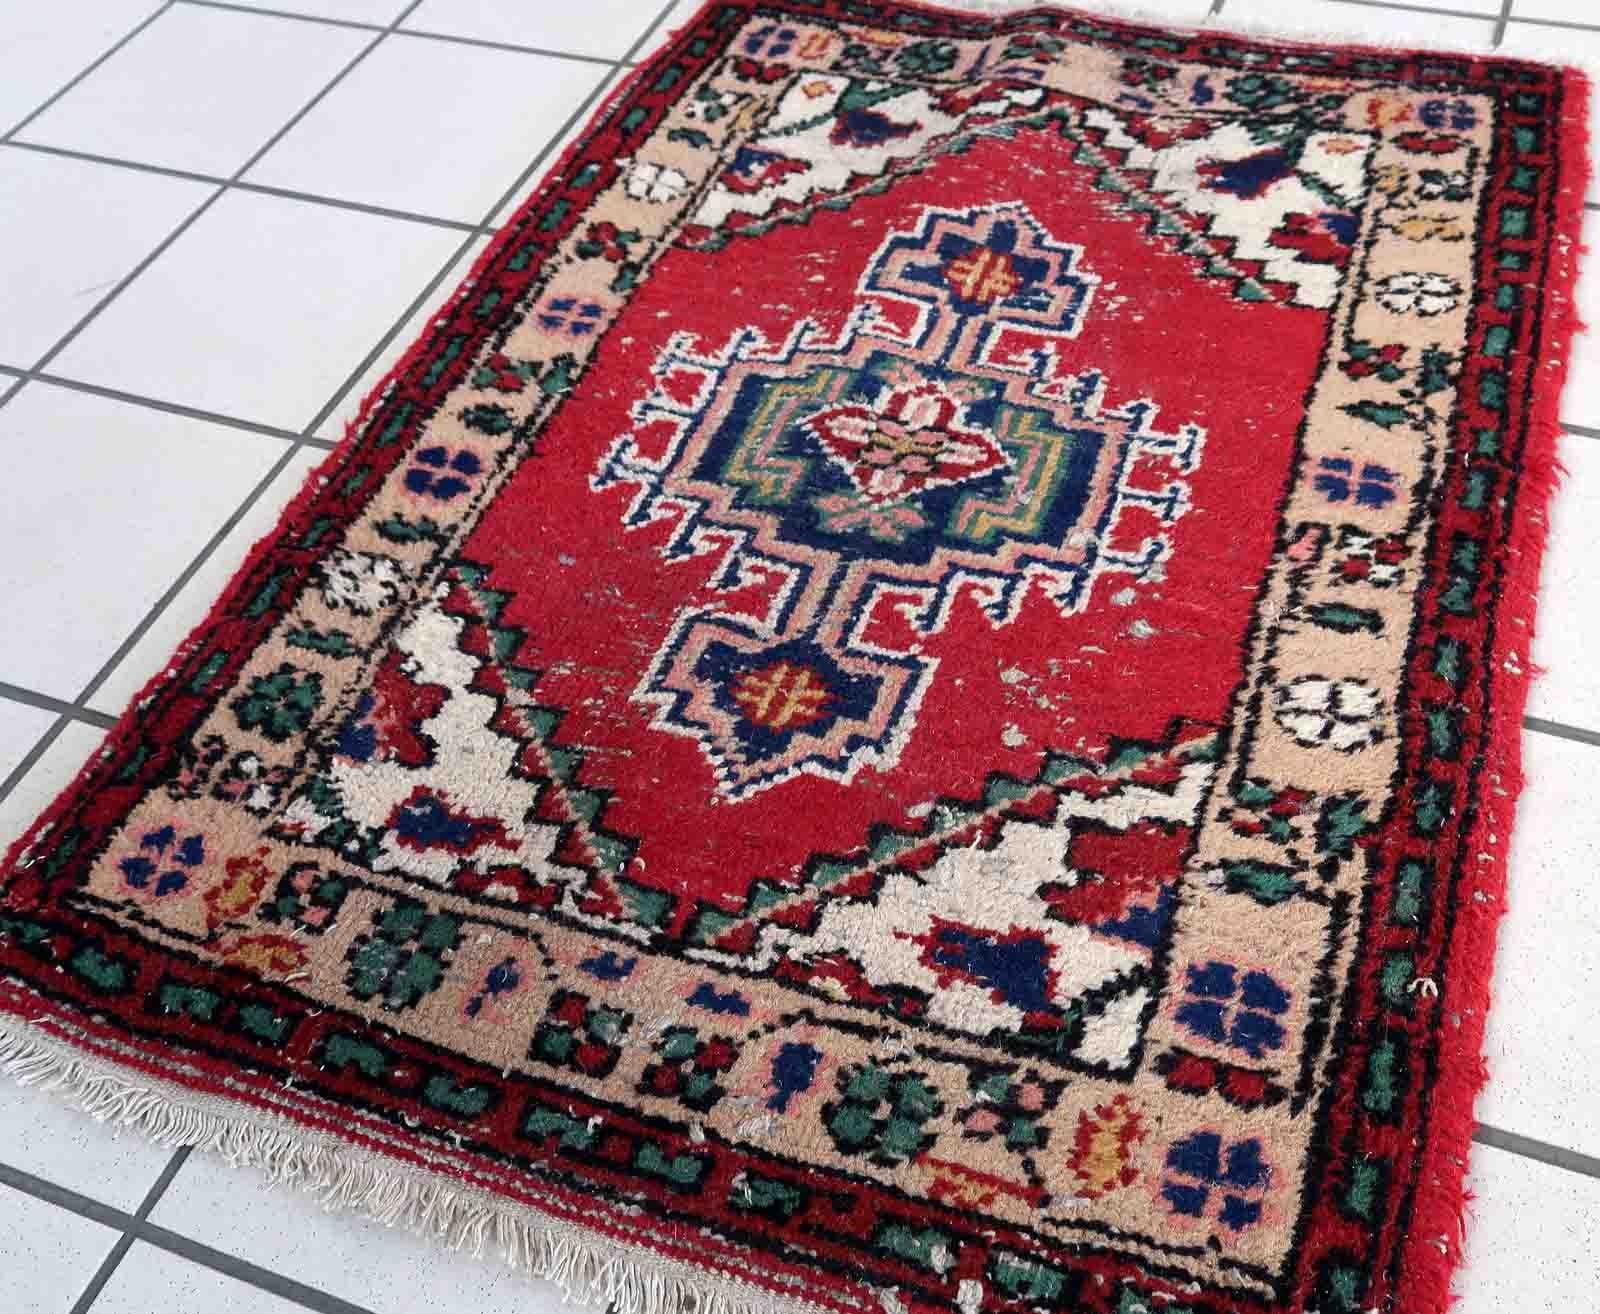 Handmade vintage Persian Hamadan rug in distressed condition. The rug has been made in wool in the end of 20th century.

-condition: distressed,

-circa: 1970s,

-size: 2.1' x 2.9' (65cm x 89cm),

-material: wool,

-country of origin: Middle